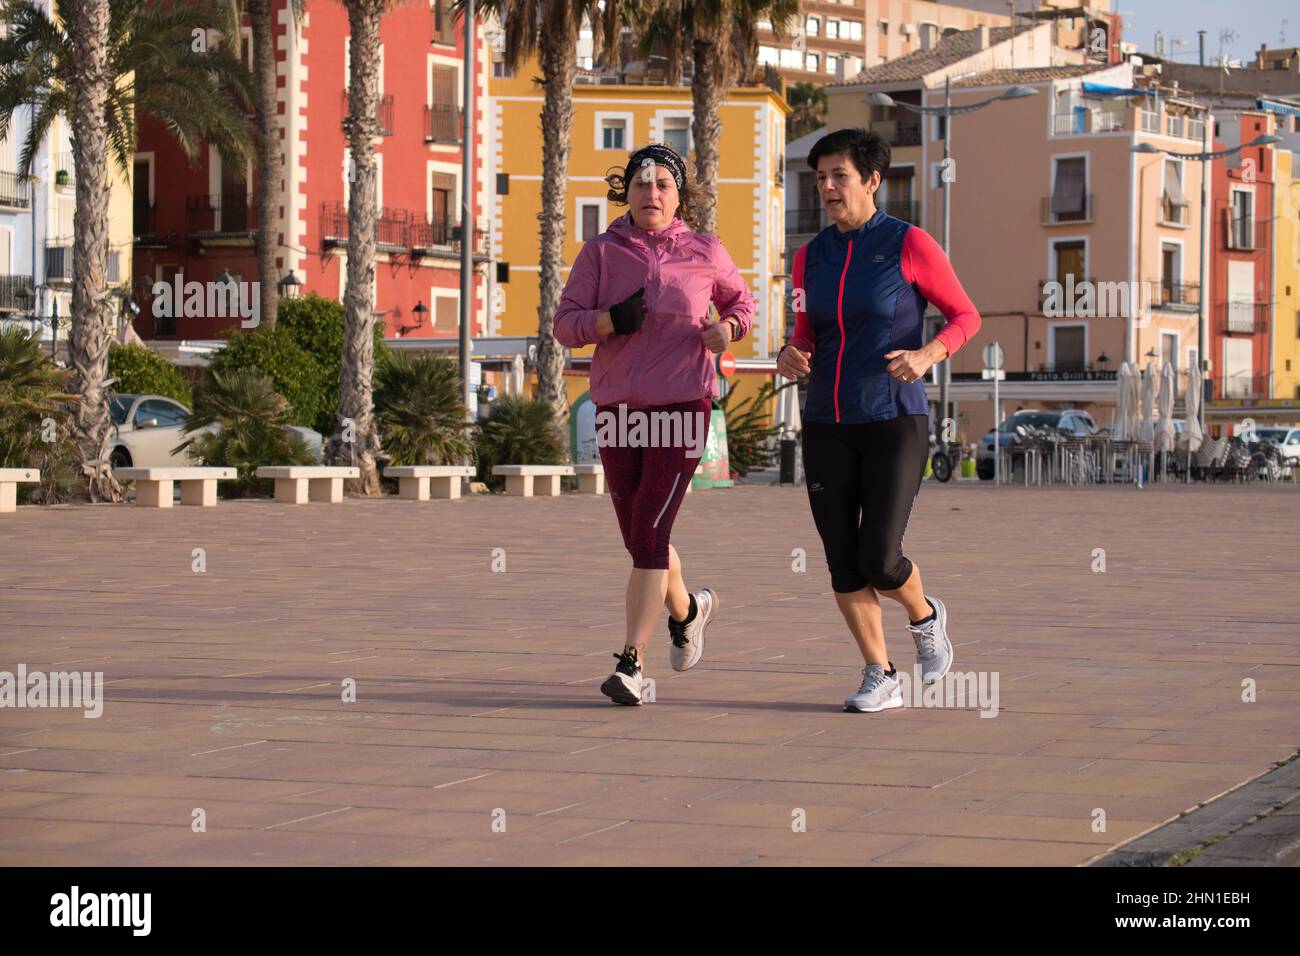 Villajoysa Alicante Spain 02.13.22 Two senior ladies wearing leggings and long-sleeved windproof vests jogging along a pedestrian zone. Palm trees. Stock Photo